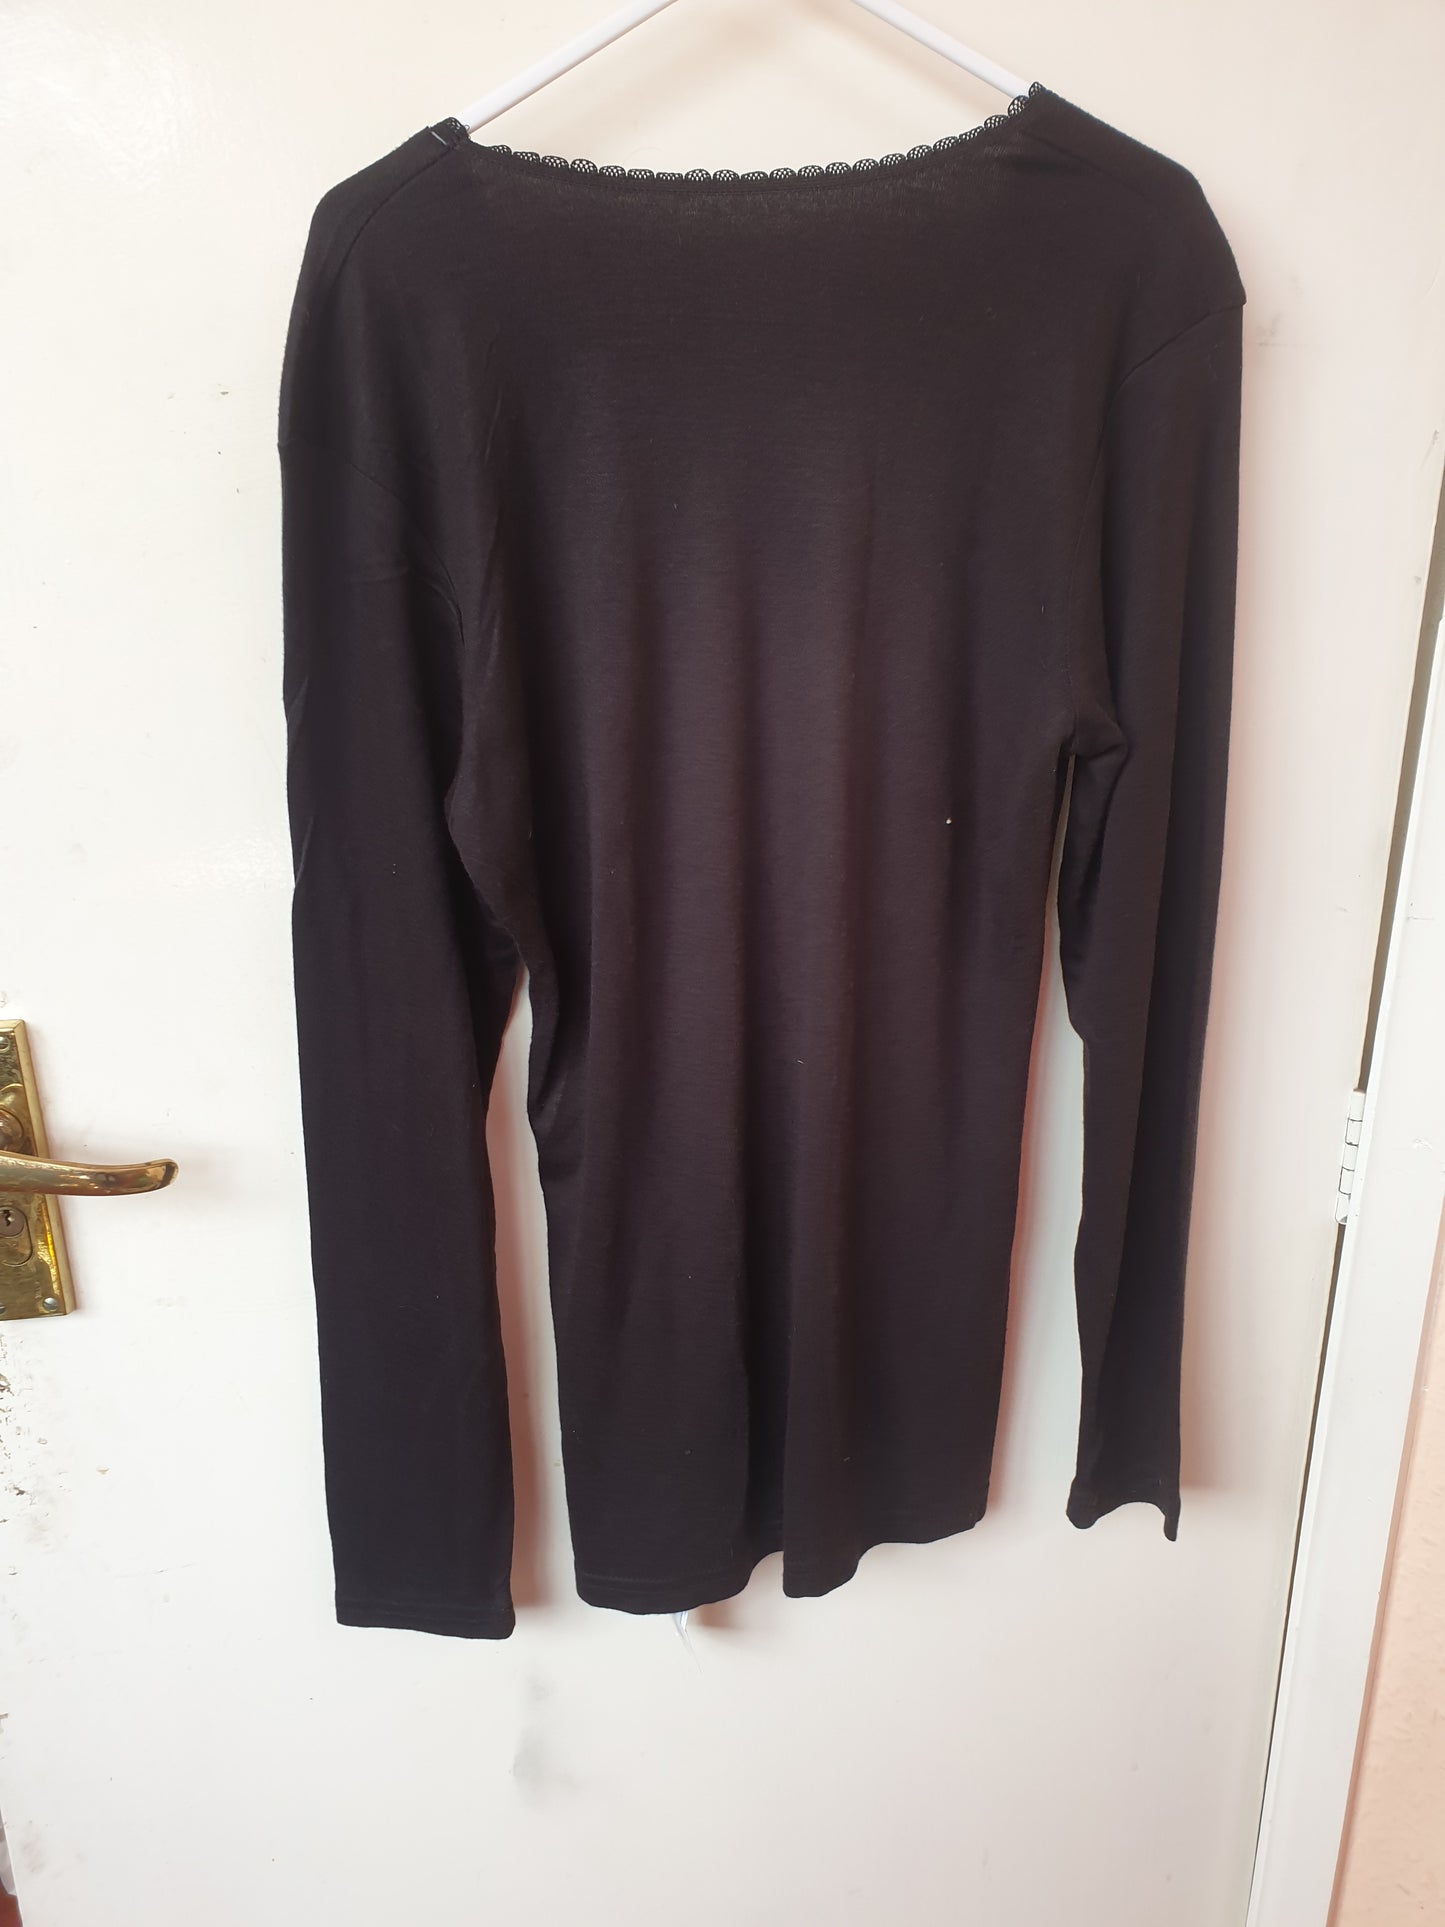 NEW WITH TAGS Avenue black long sleeved thermal top size 16/18 FREE POSTAGE ✅